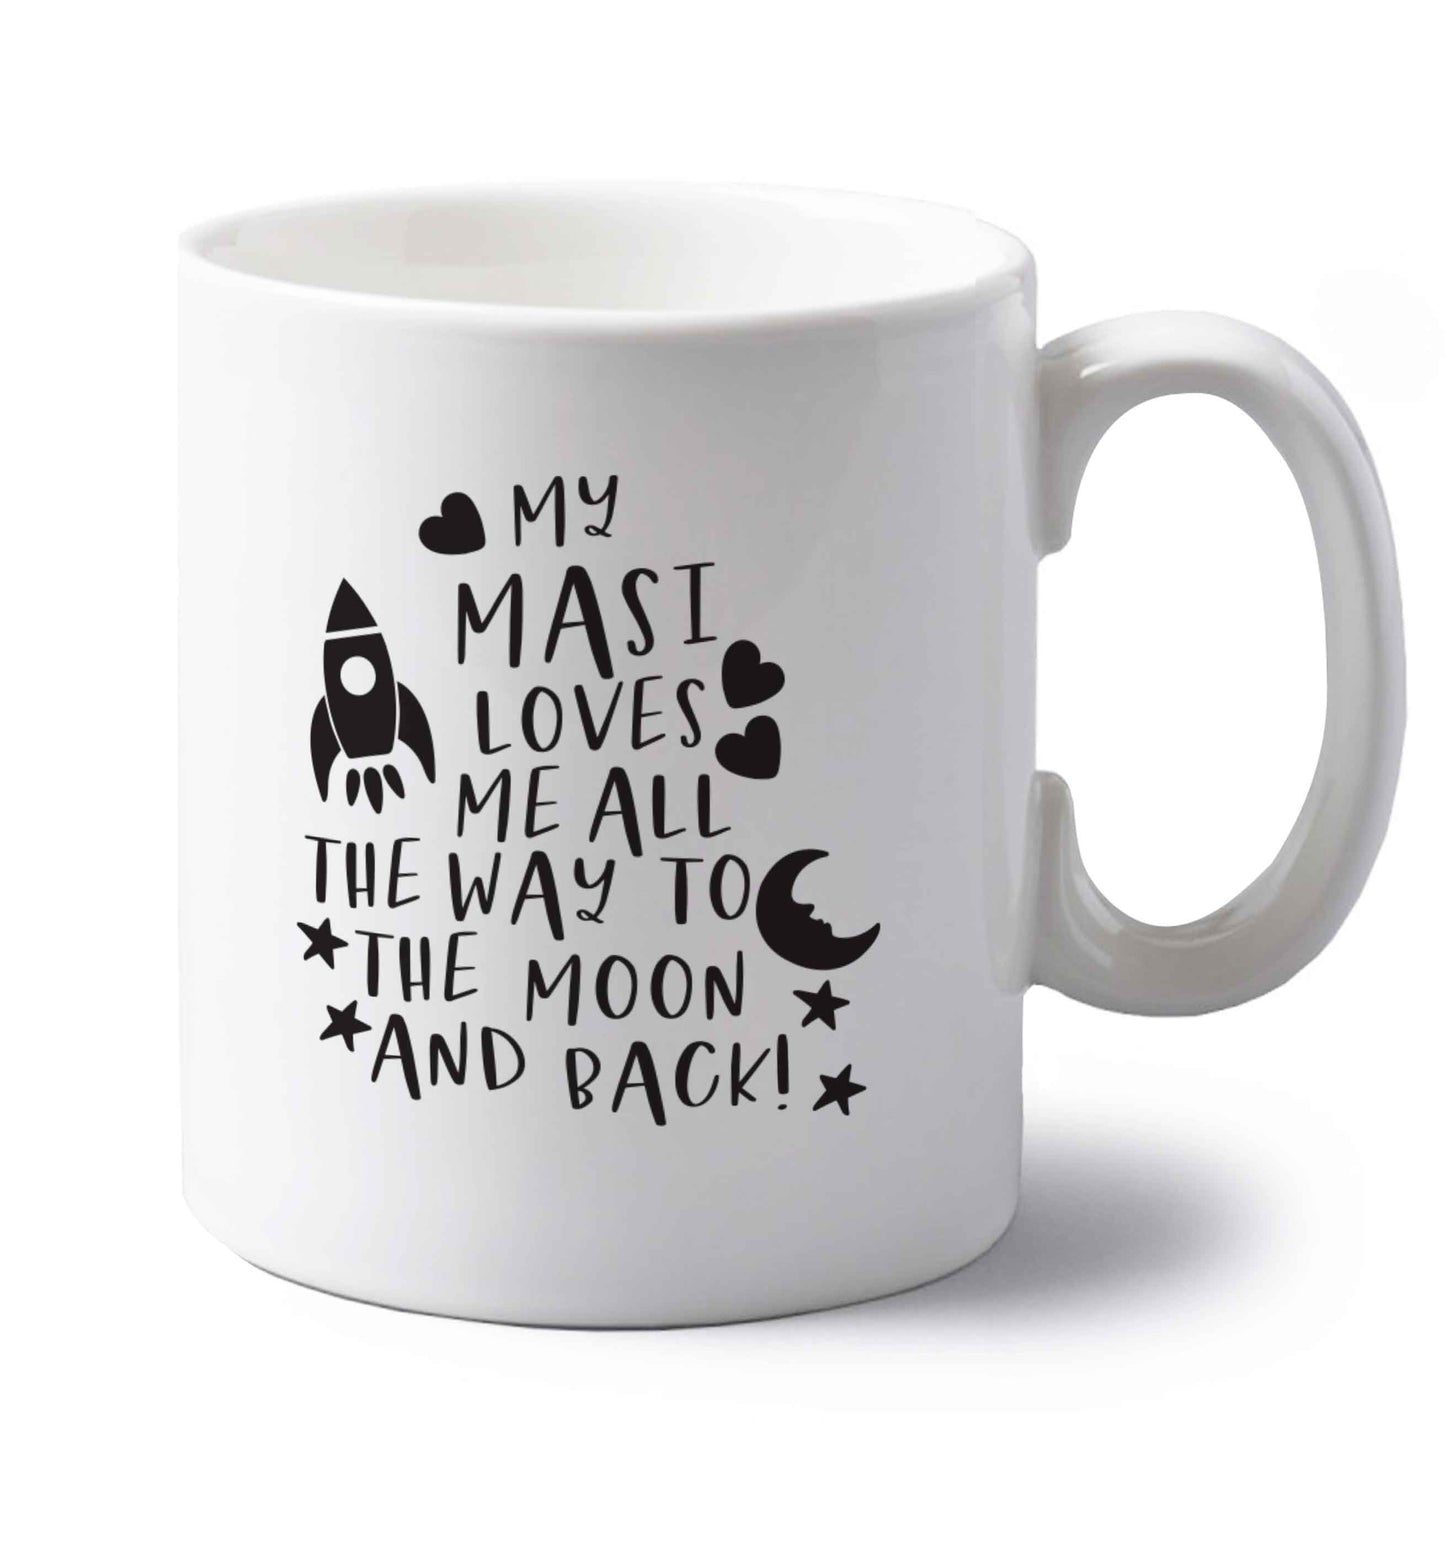 My masi loves me all the way to the moon and back left handed white ceramic mug 